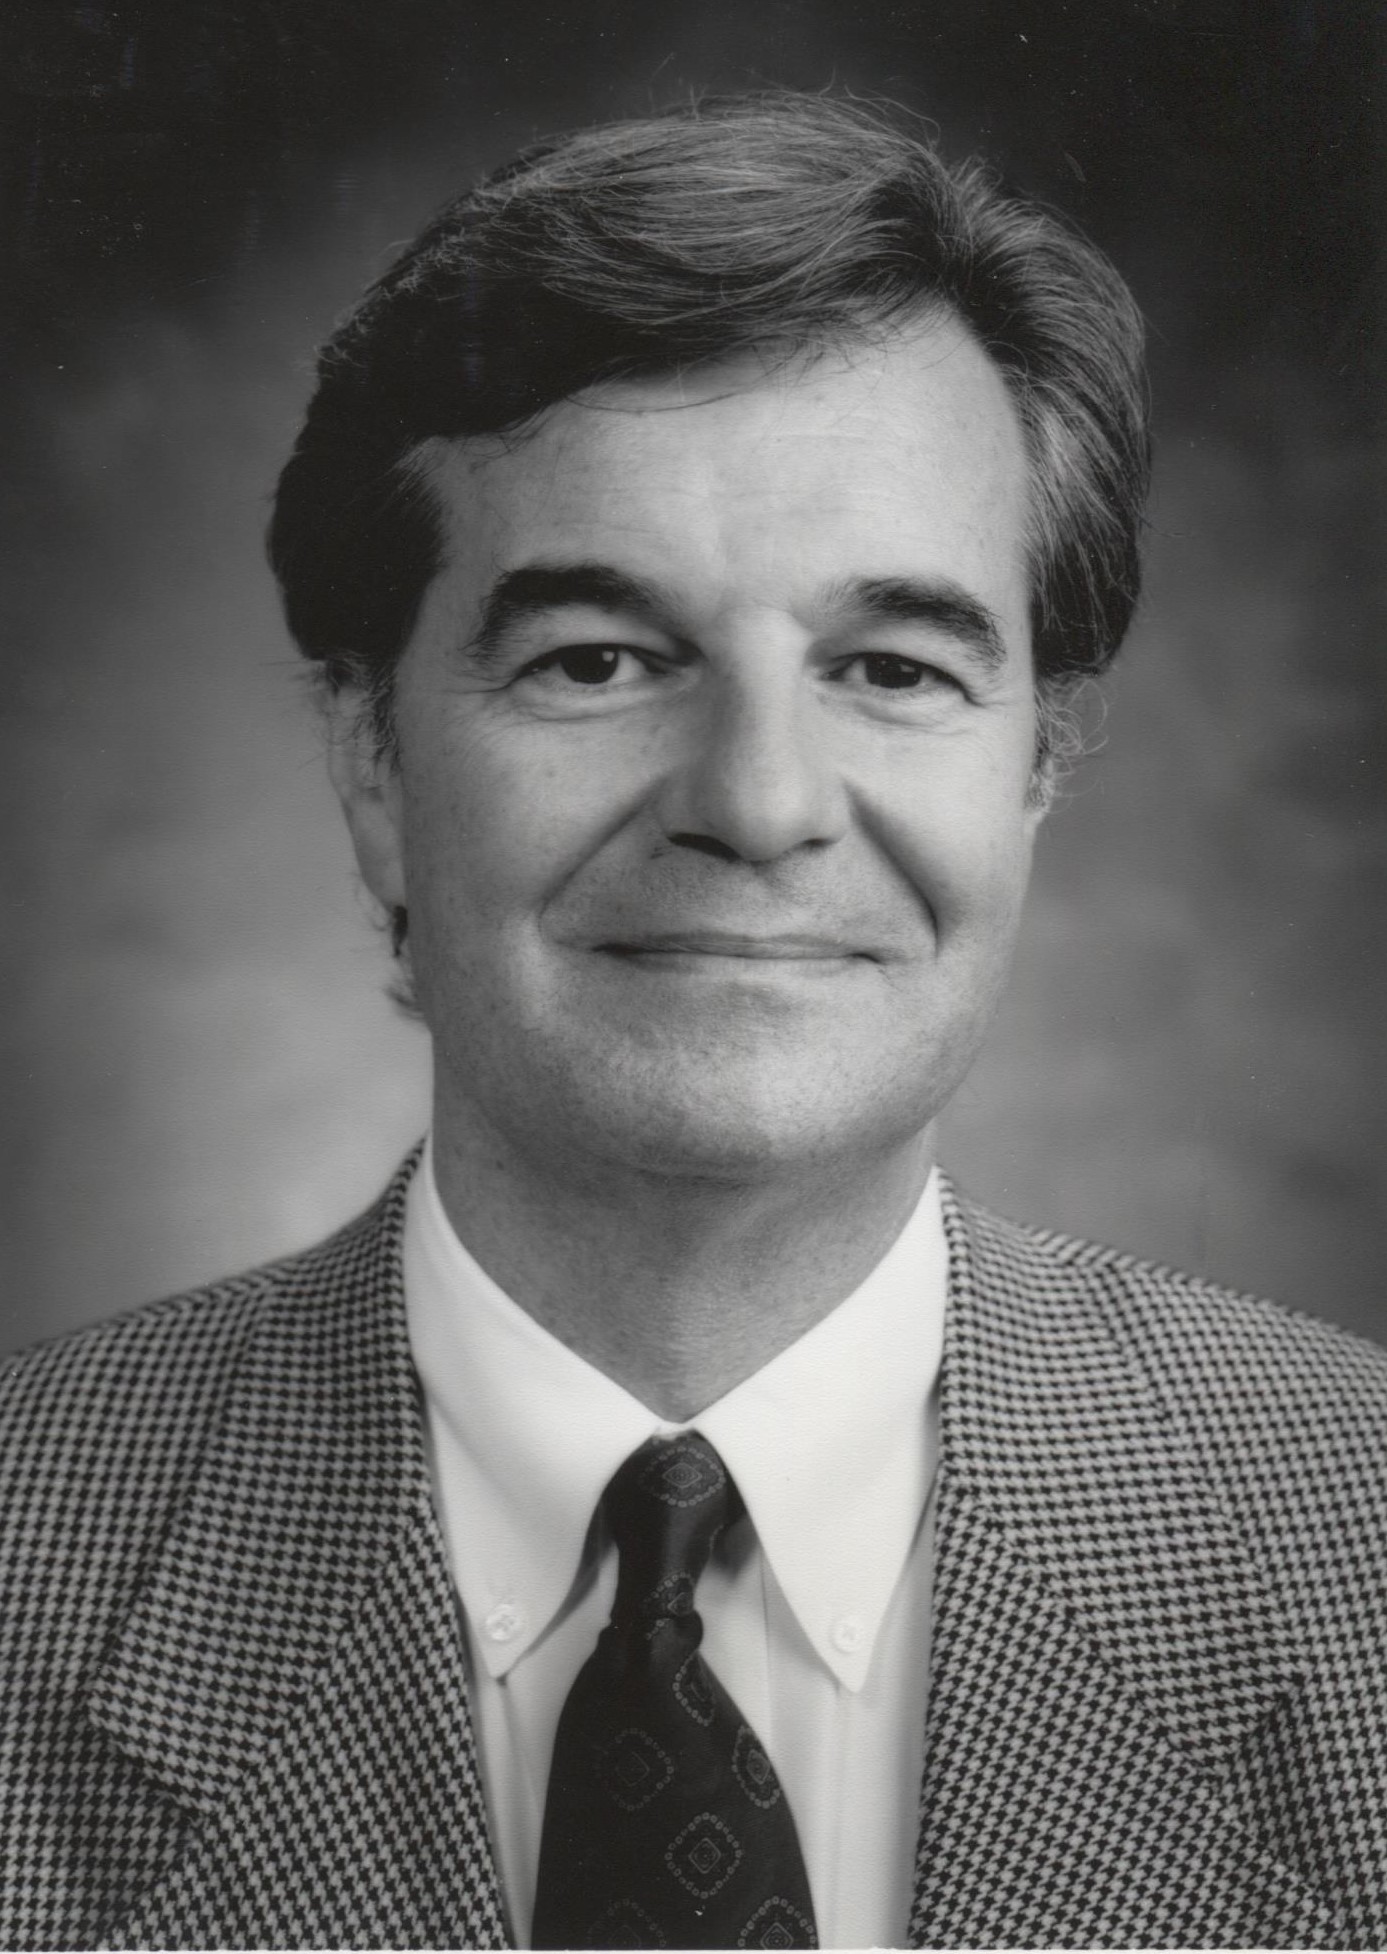 1989- Dr. Stagno Becomes Chairman